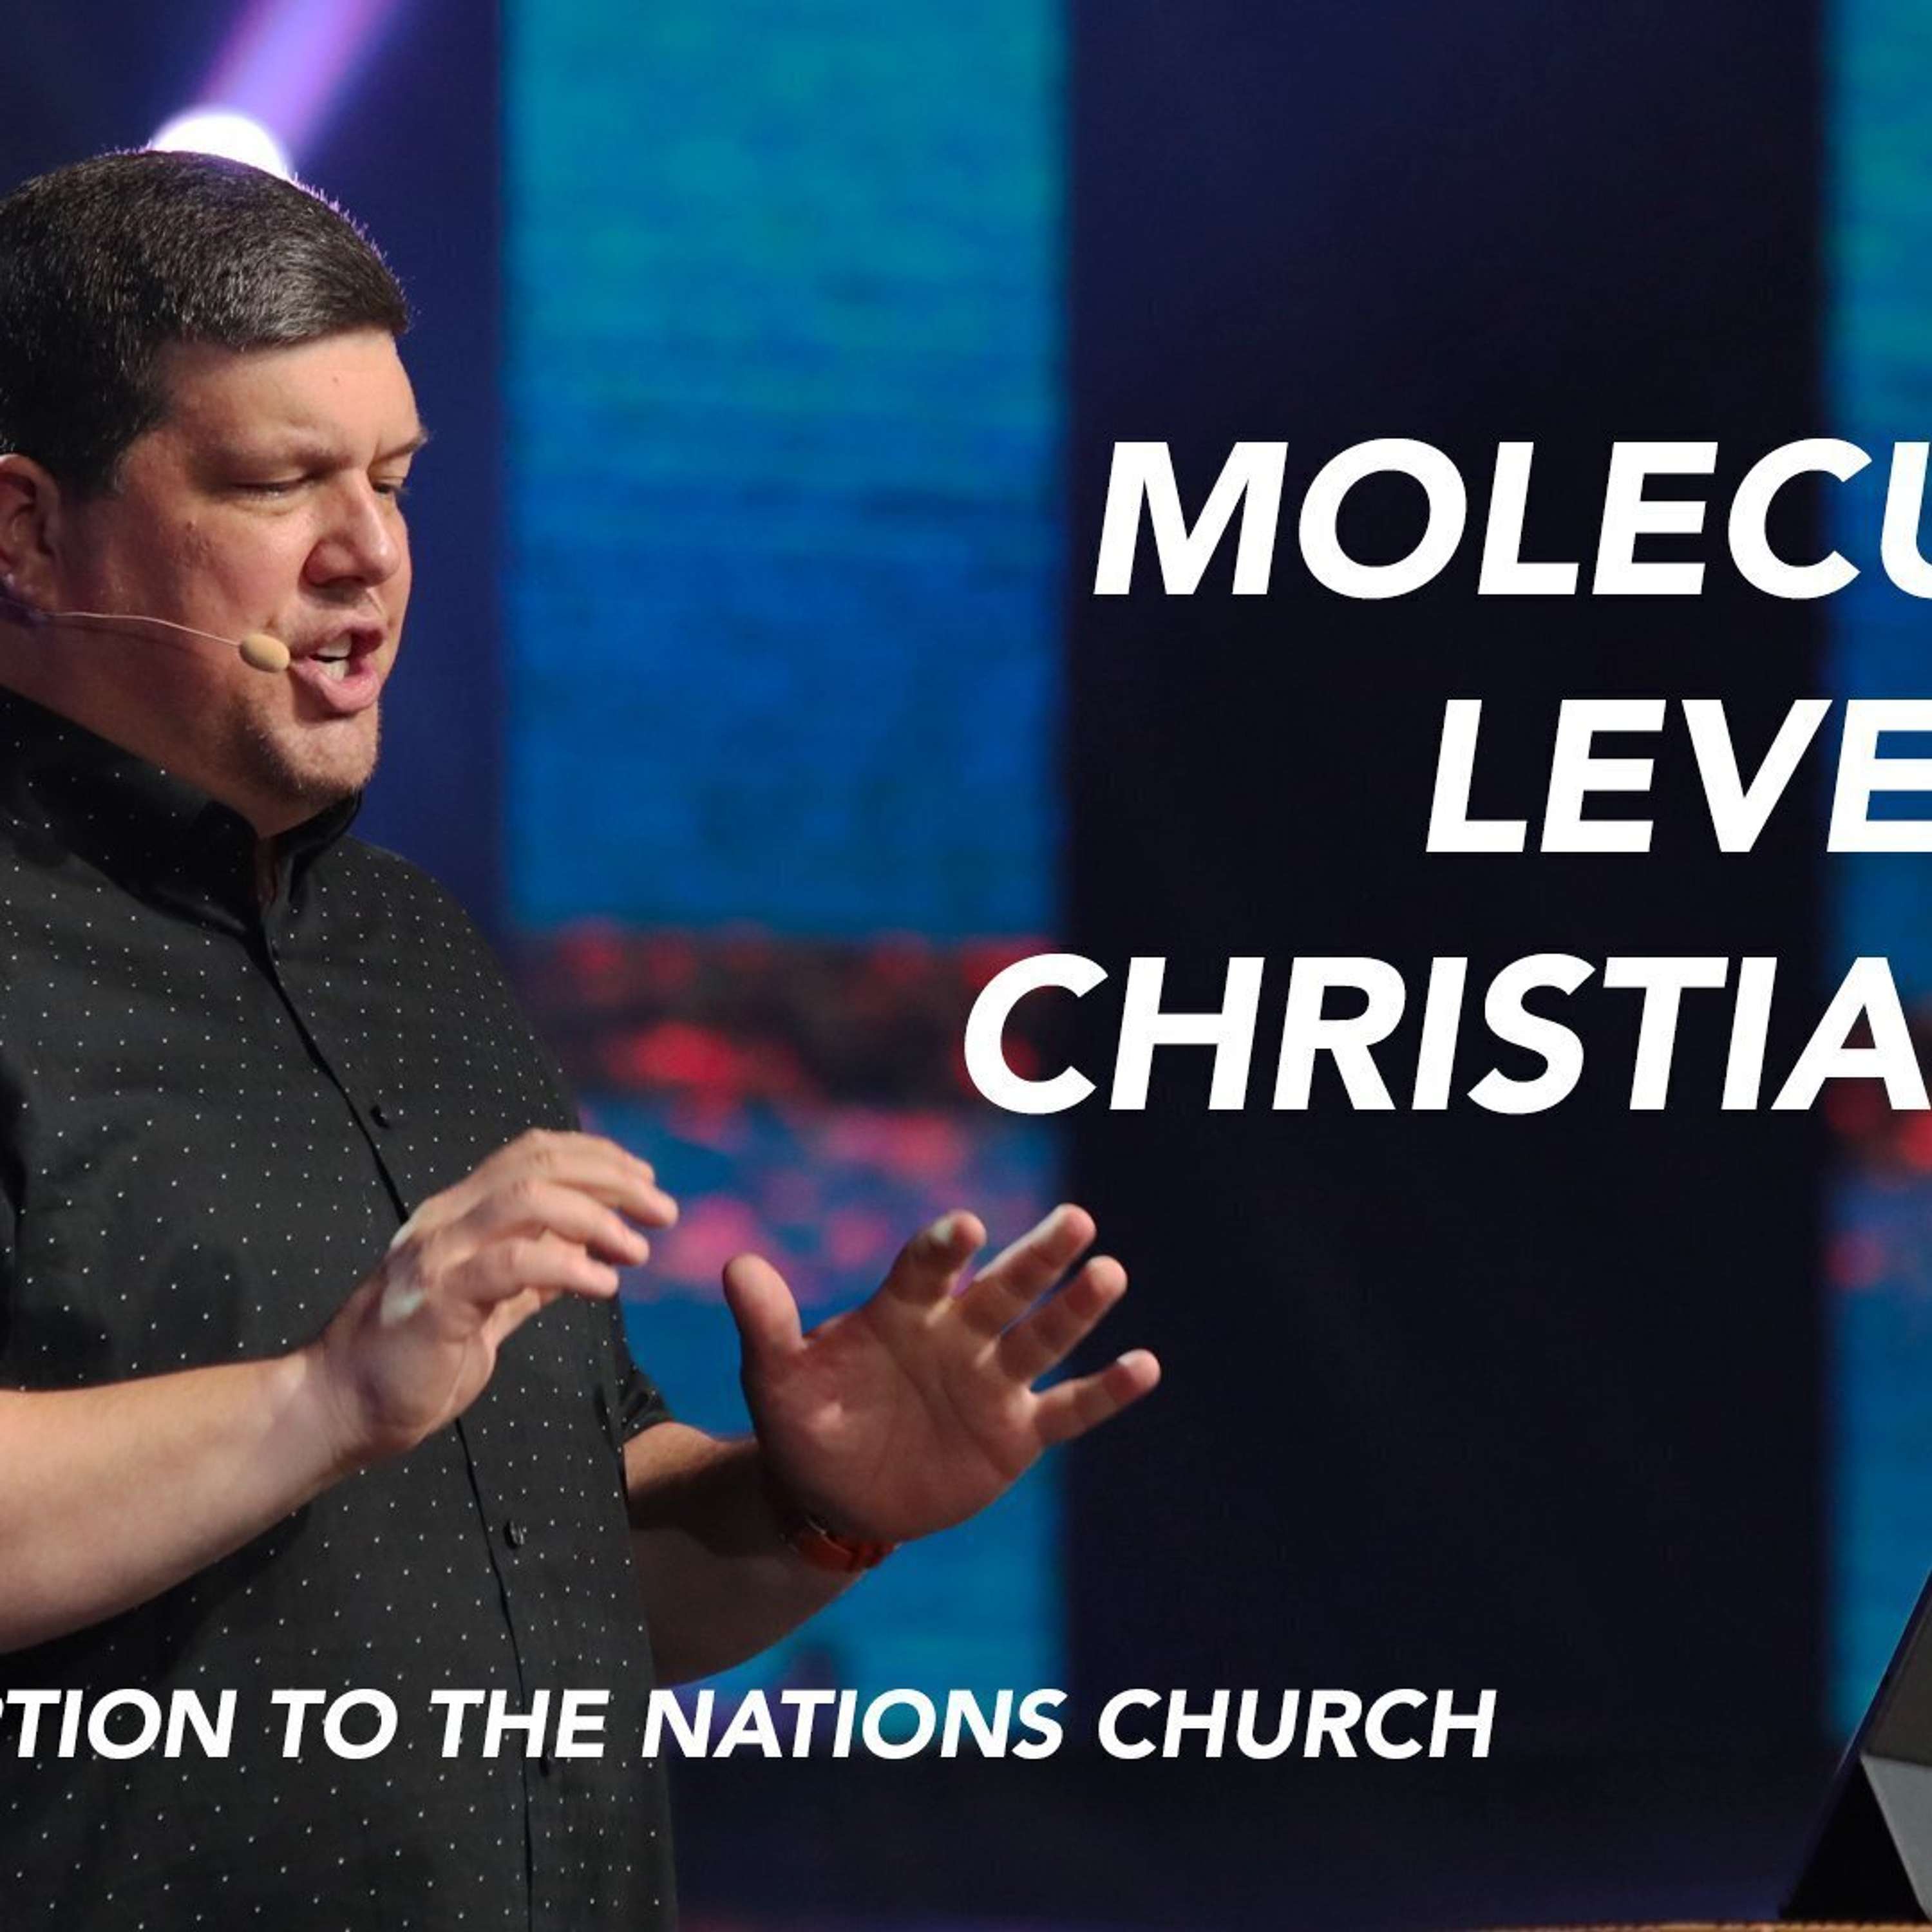 The Molecular Level of Christianity